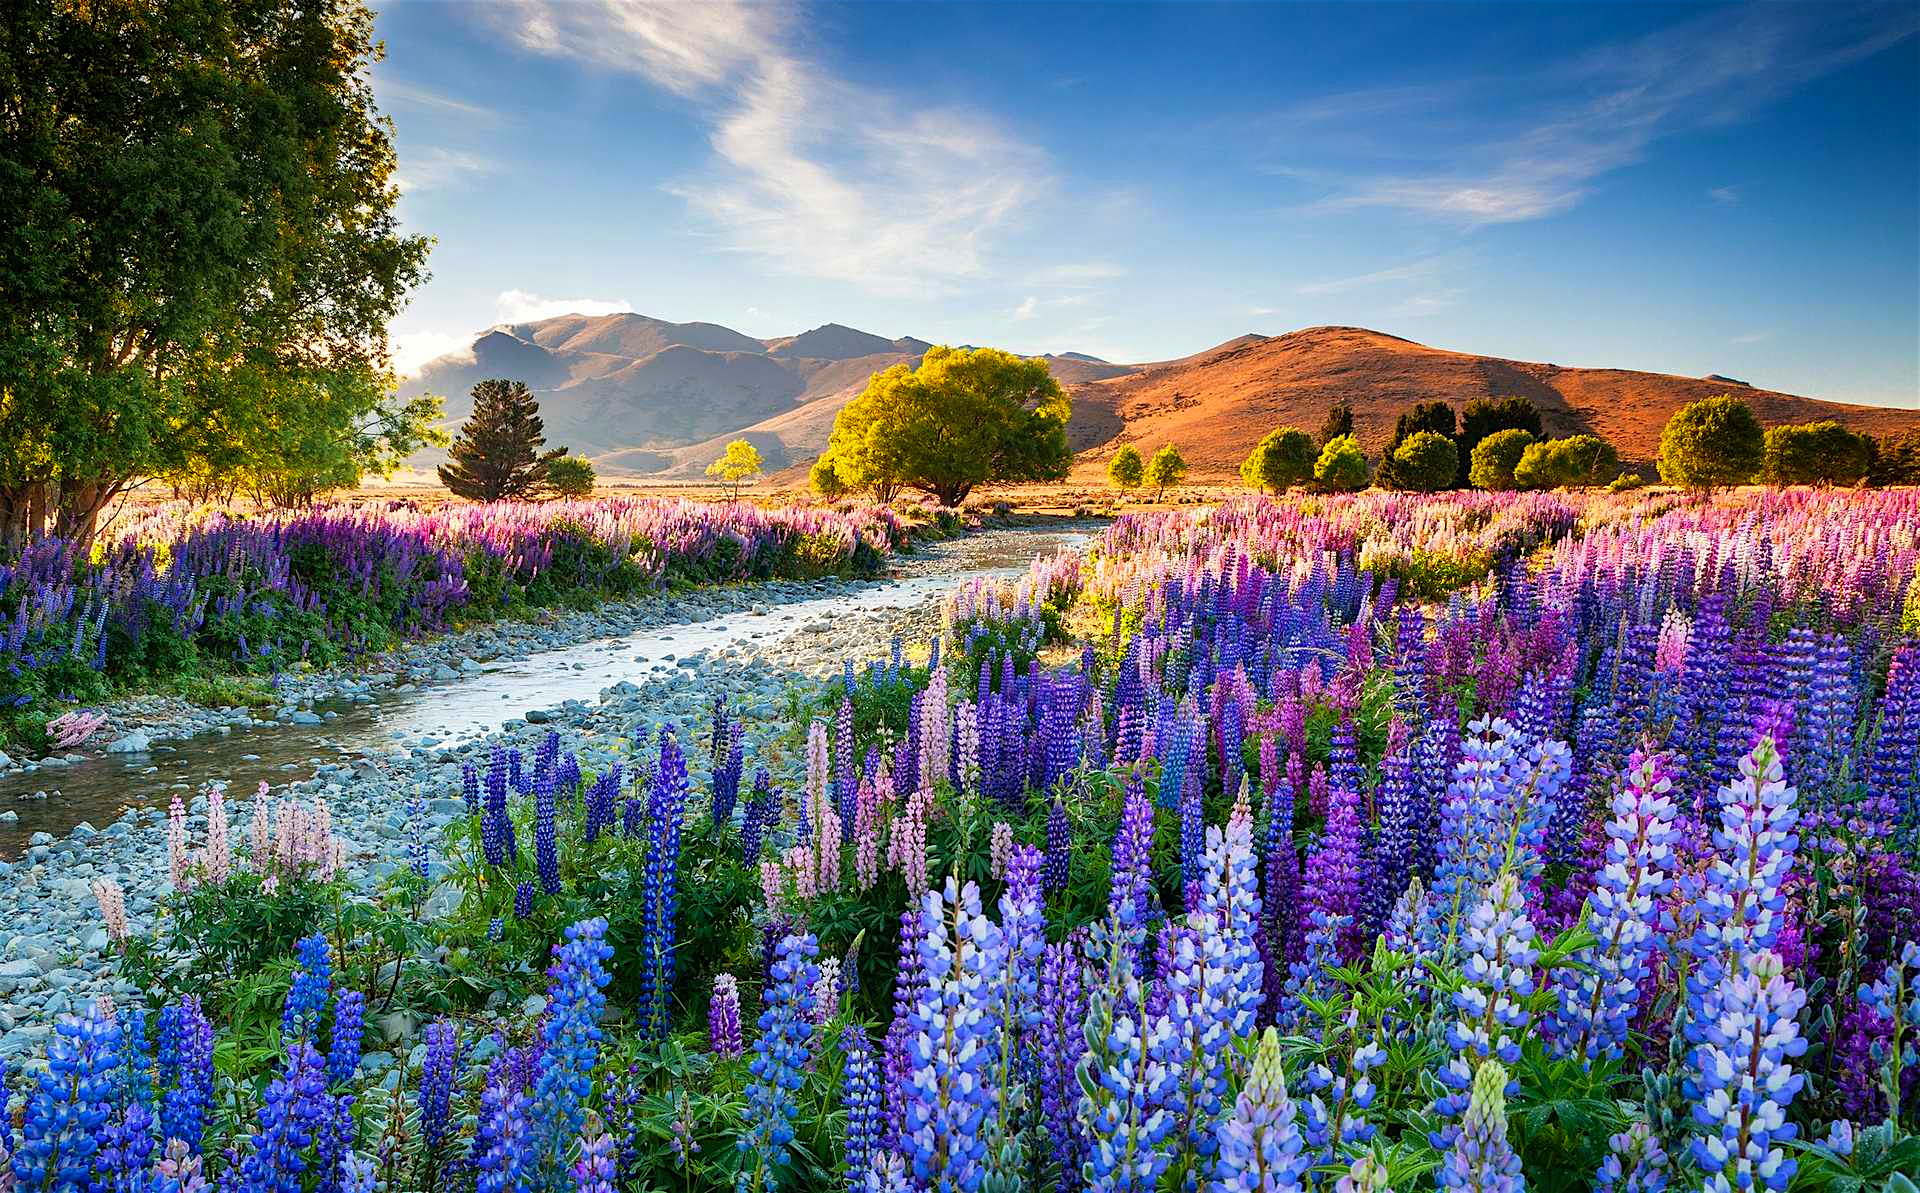 The-overall-winning-entry-was-of-Tekapo-lupins-taken-by-Richard-Bloom.jpg